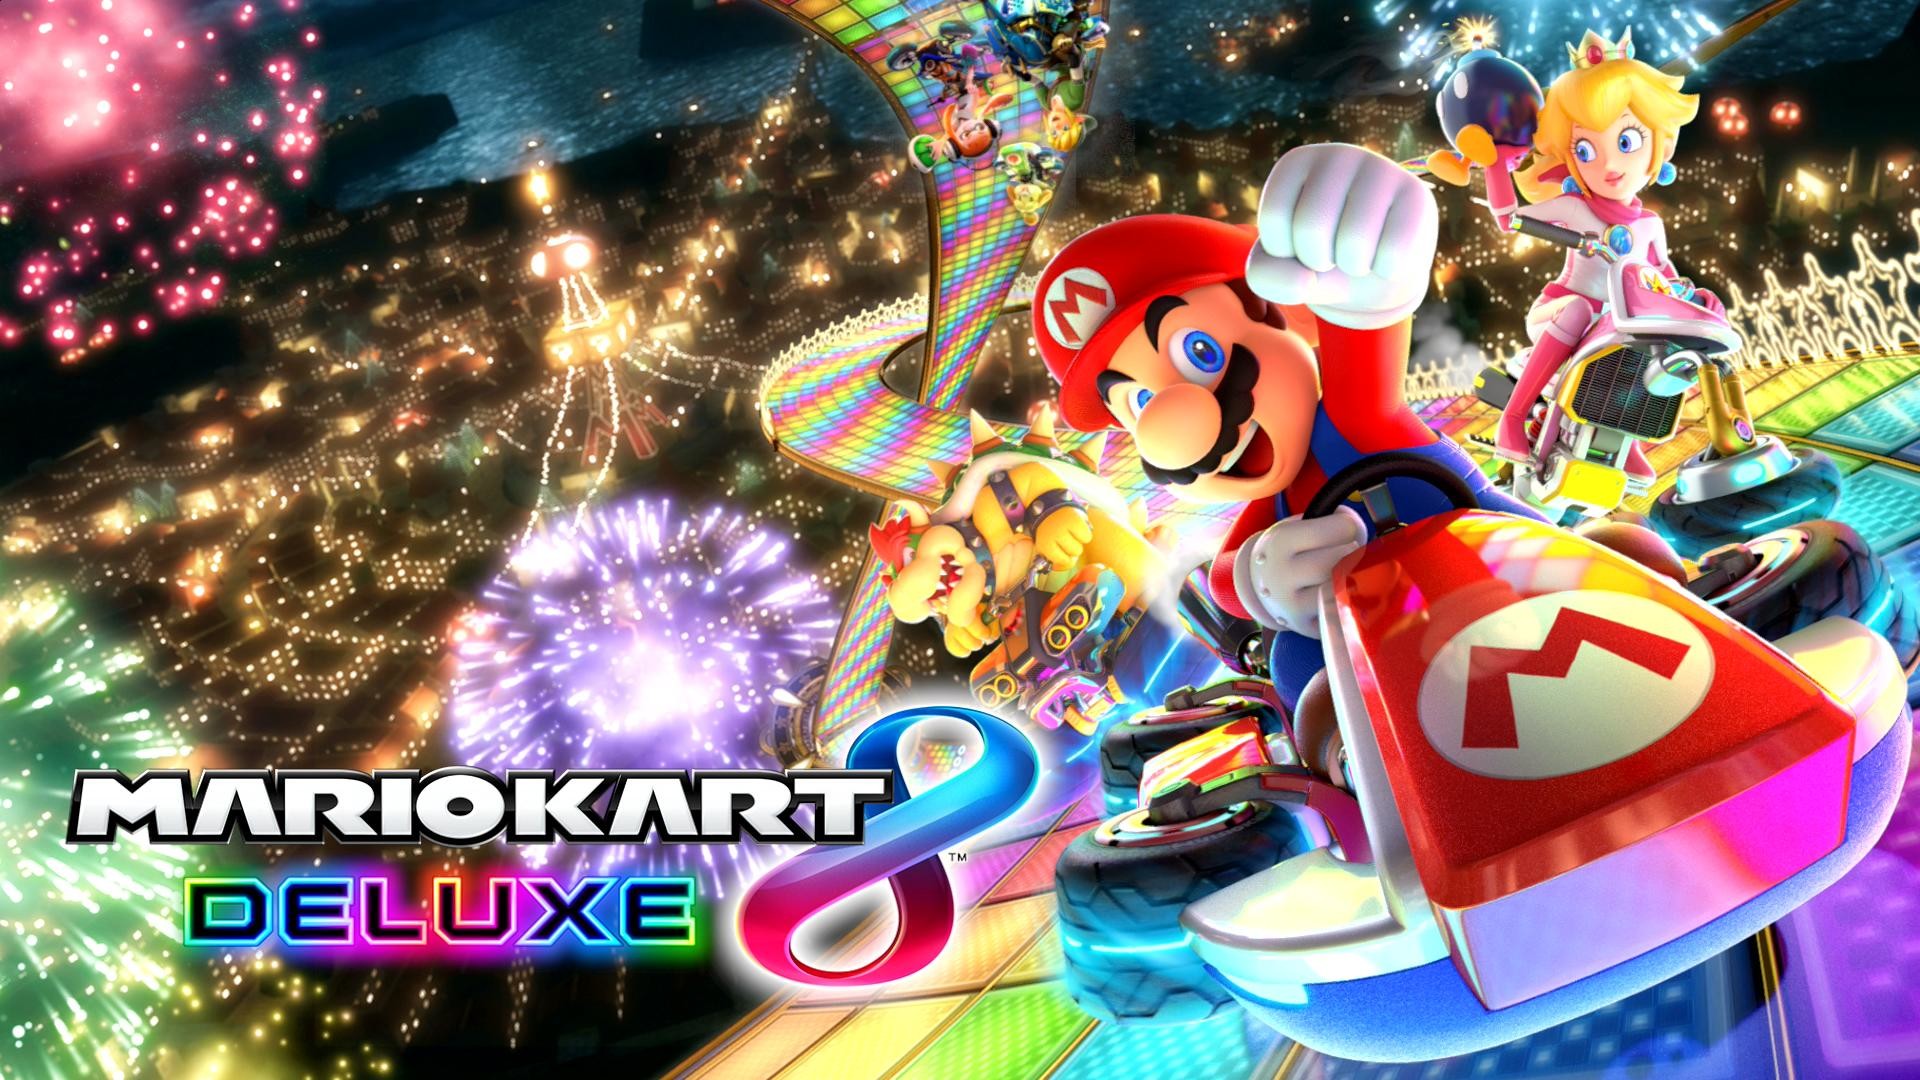 1920x1080 A collection of Mario Kart 8 Deluxe wallpapers.